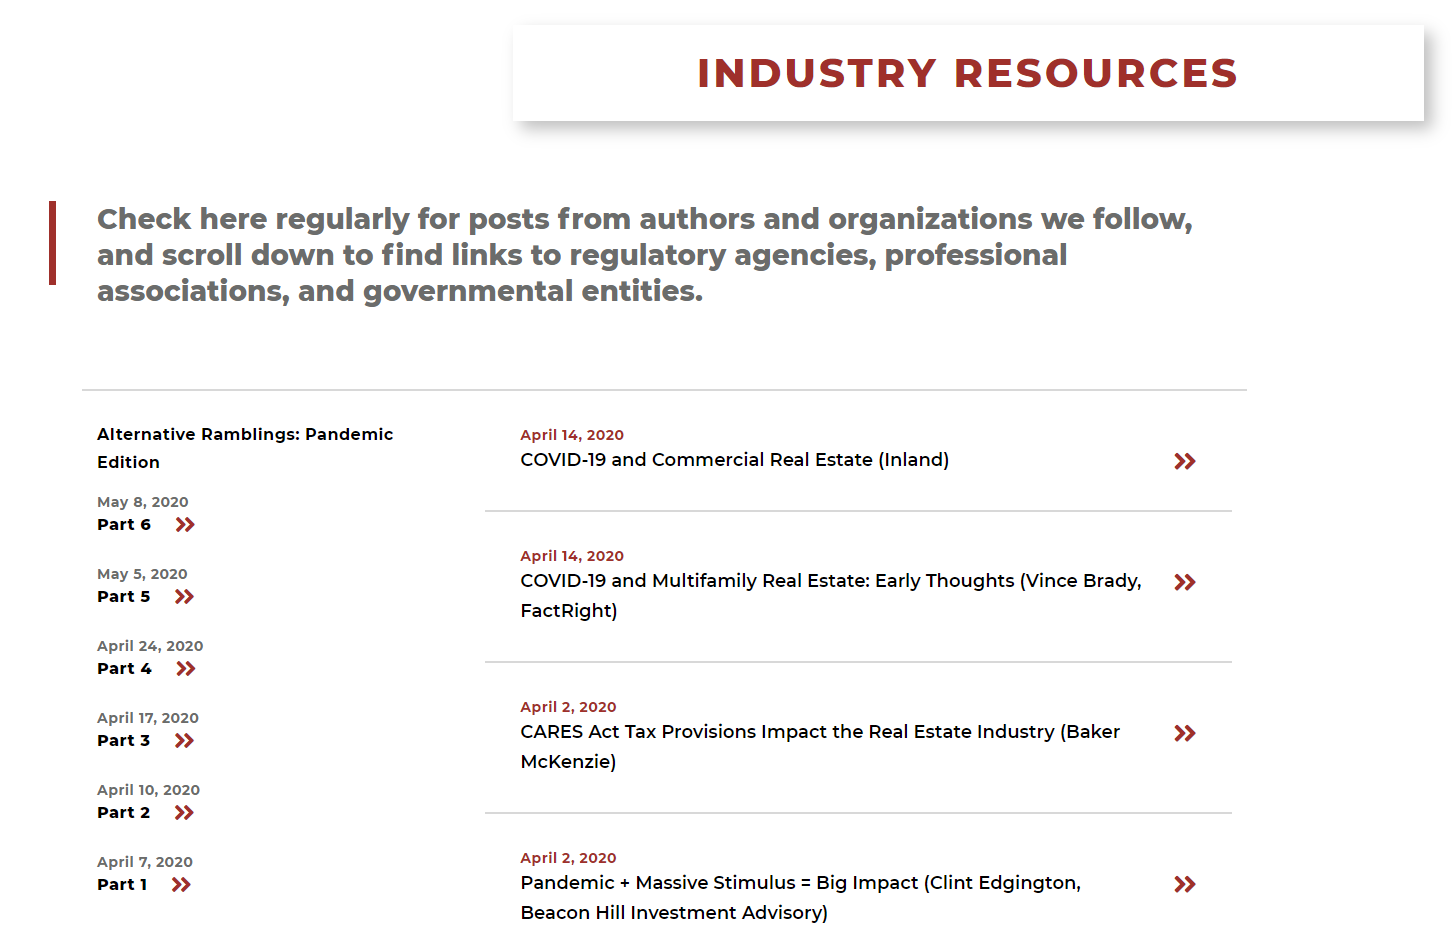 Industry resources